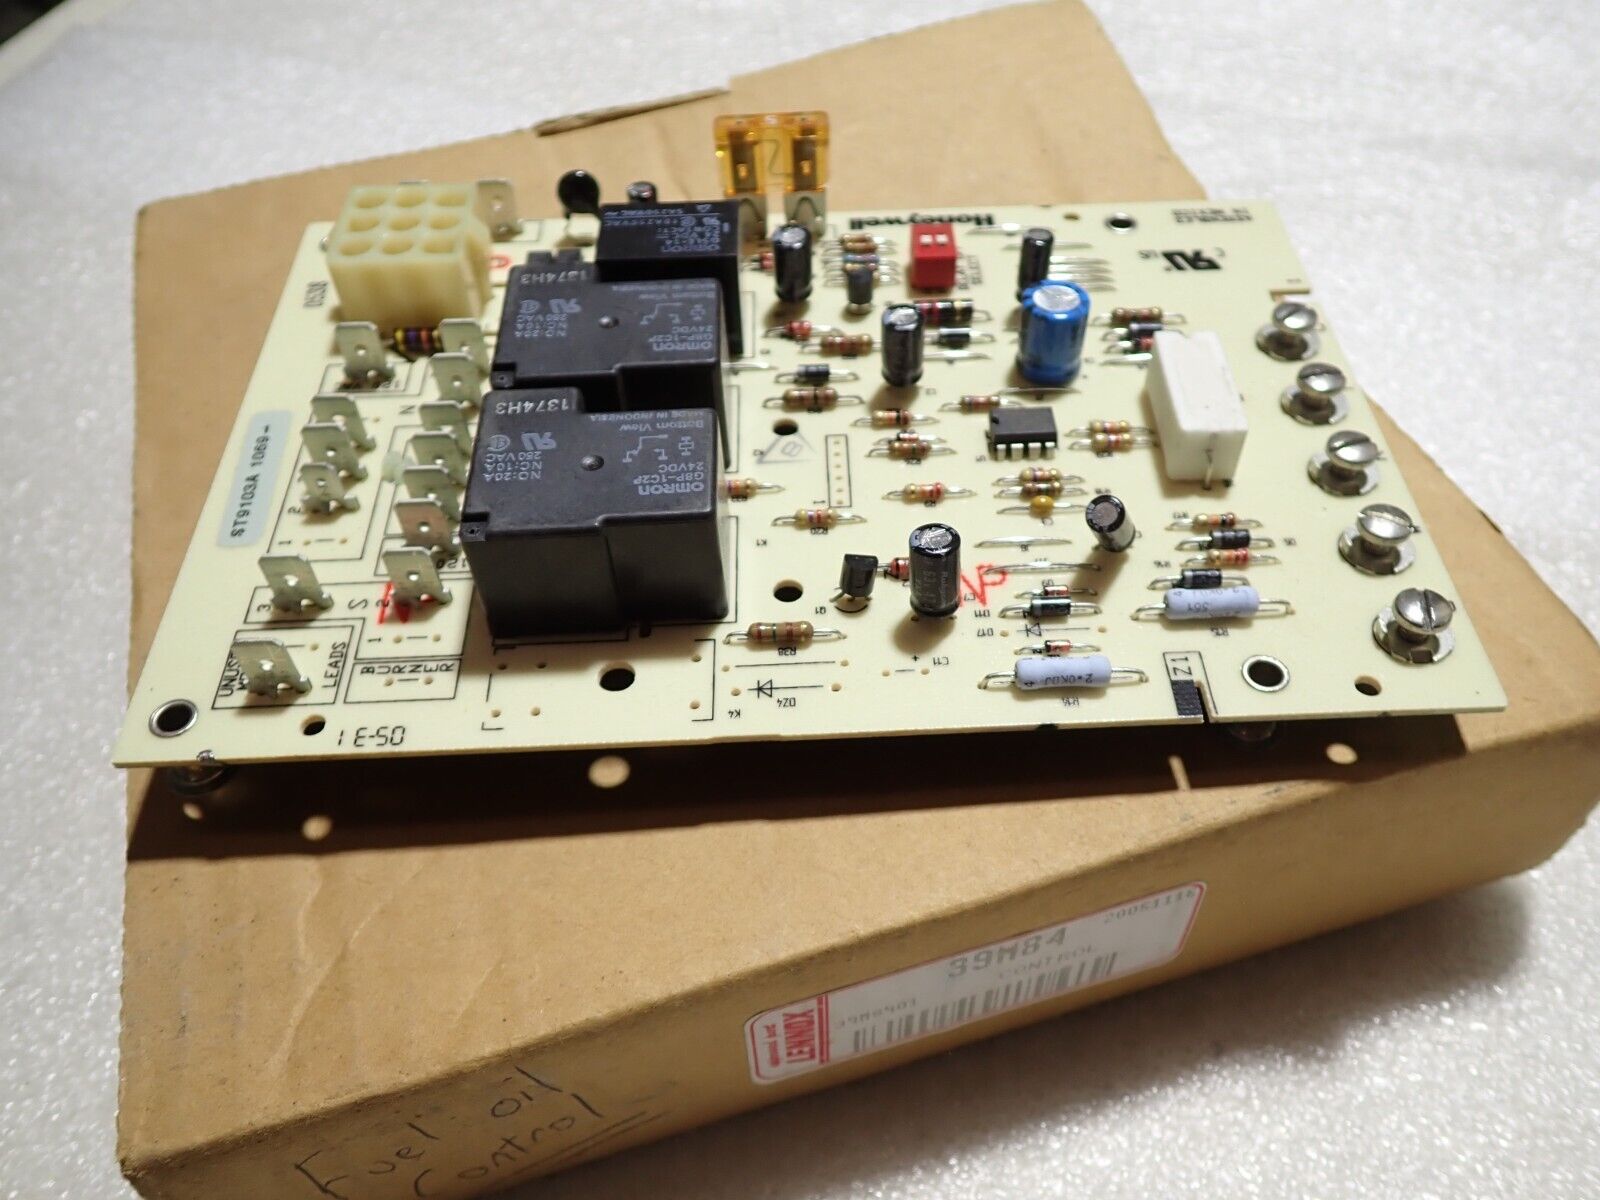 39M84 ST9103A LENNOX DUCANE ARMSTRONG FURNACE CONTROL BOARD NEW